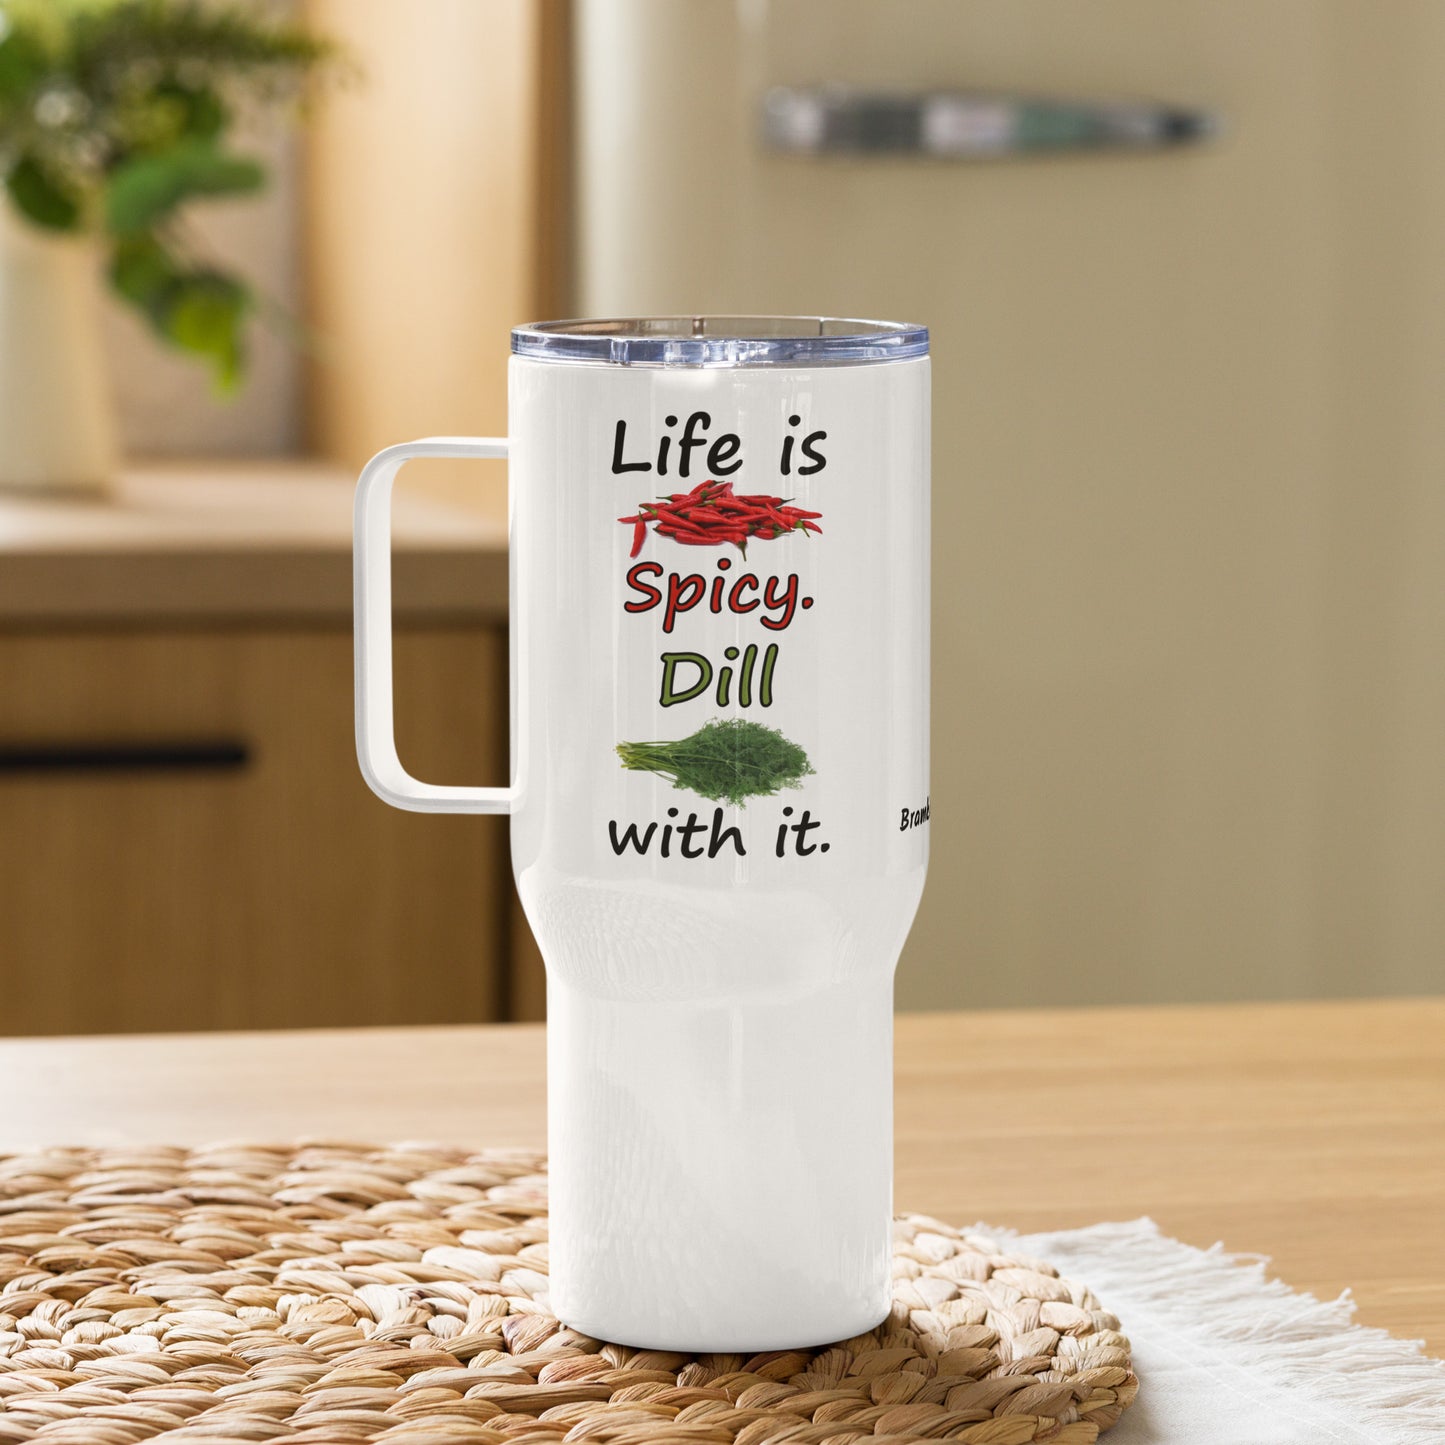 Stainless steel travel mug with handle. Holds 25 ounces of hot or cold liquids. Fits most car cup holders. Features double-sided phrase: Life is spicy. Dill with it, and accompanying chili pepper and dill weed images. Comes with spill proof plastic lid. Shown on tabletop.